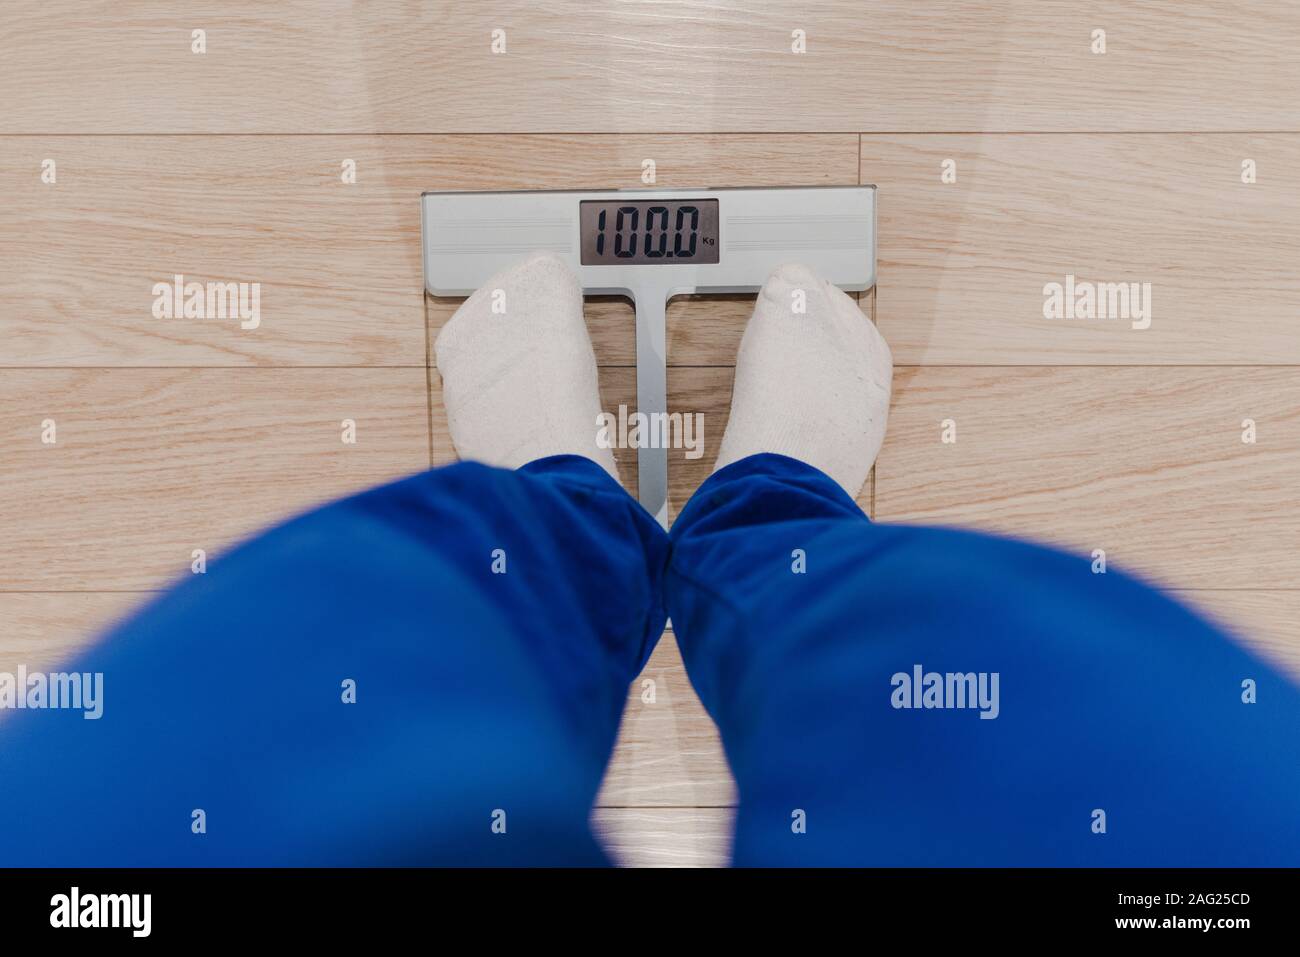 Legs in white socks stand on mechanical scales of blue color